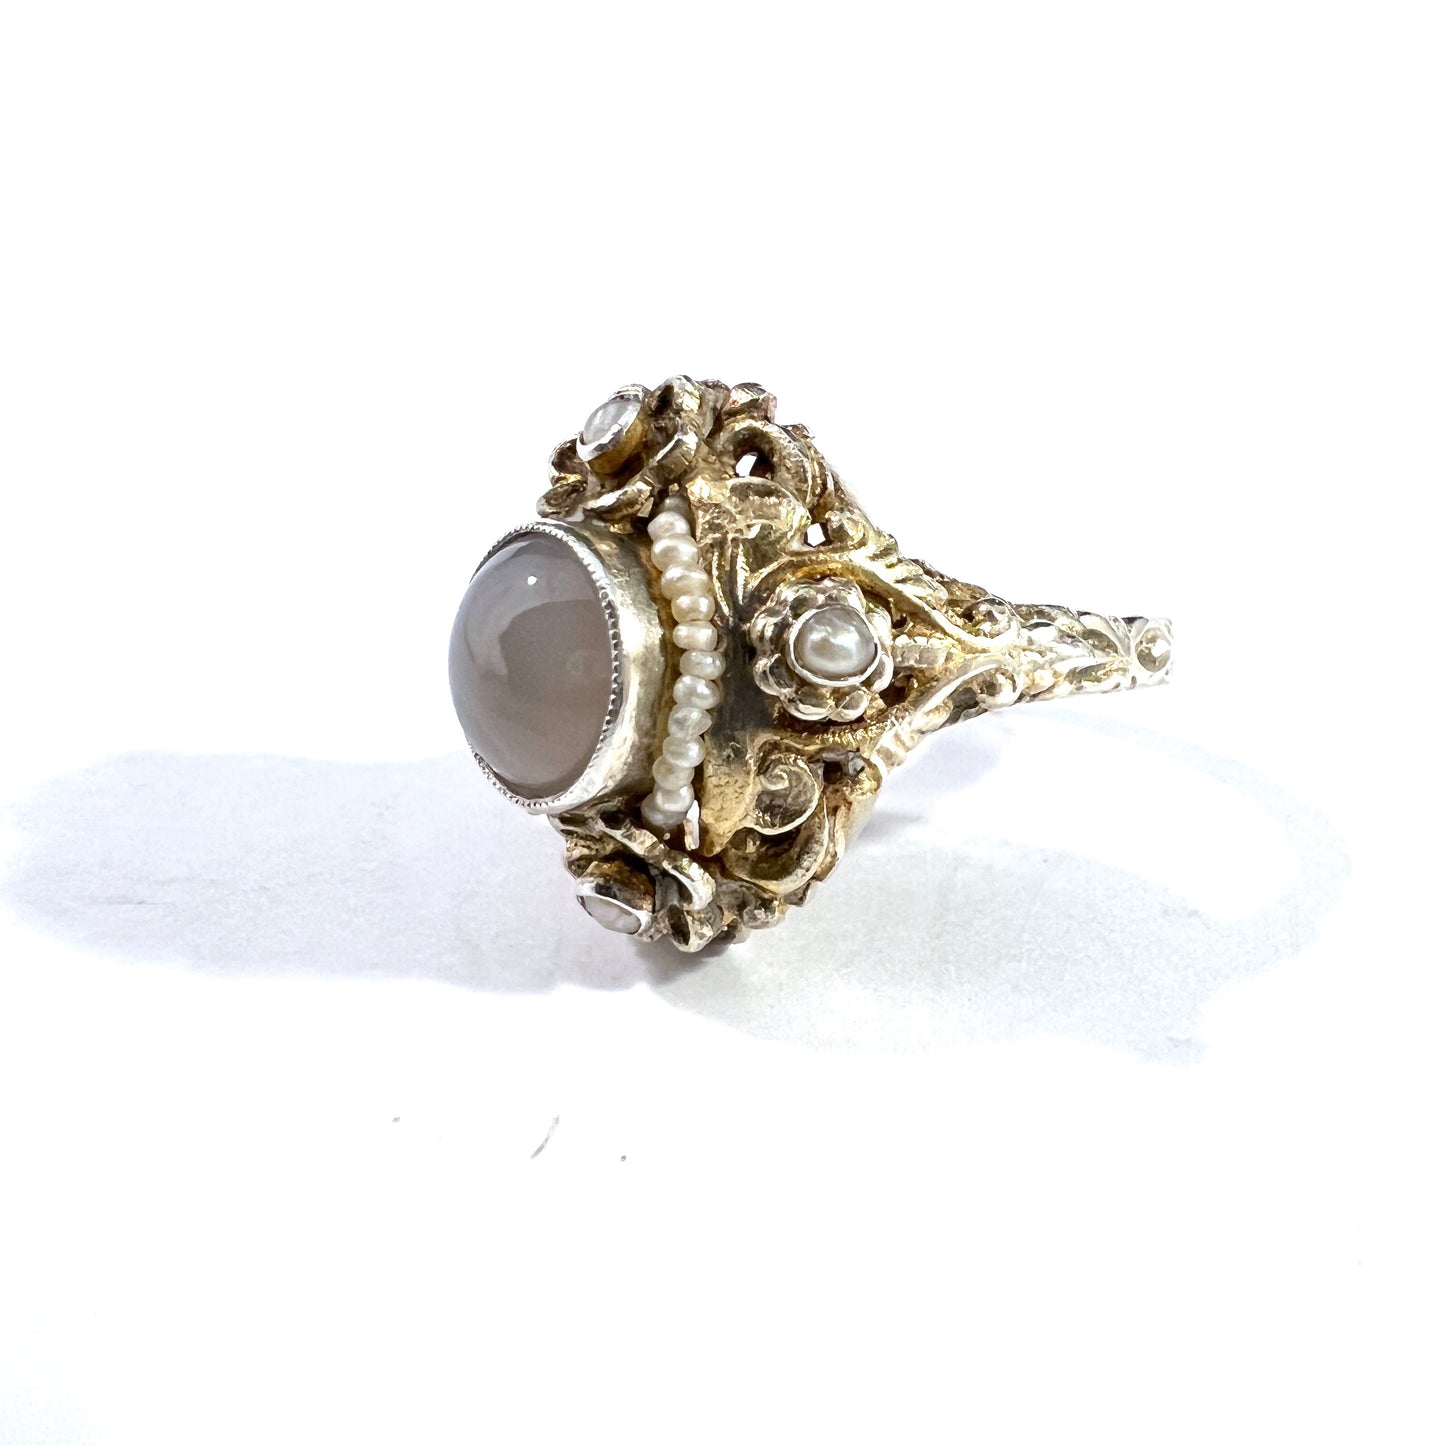 Austria / Hungary early 1900s. Solid Silver Chalcedony Pearl Ring